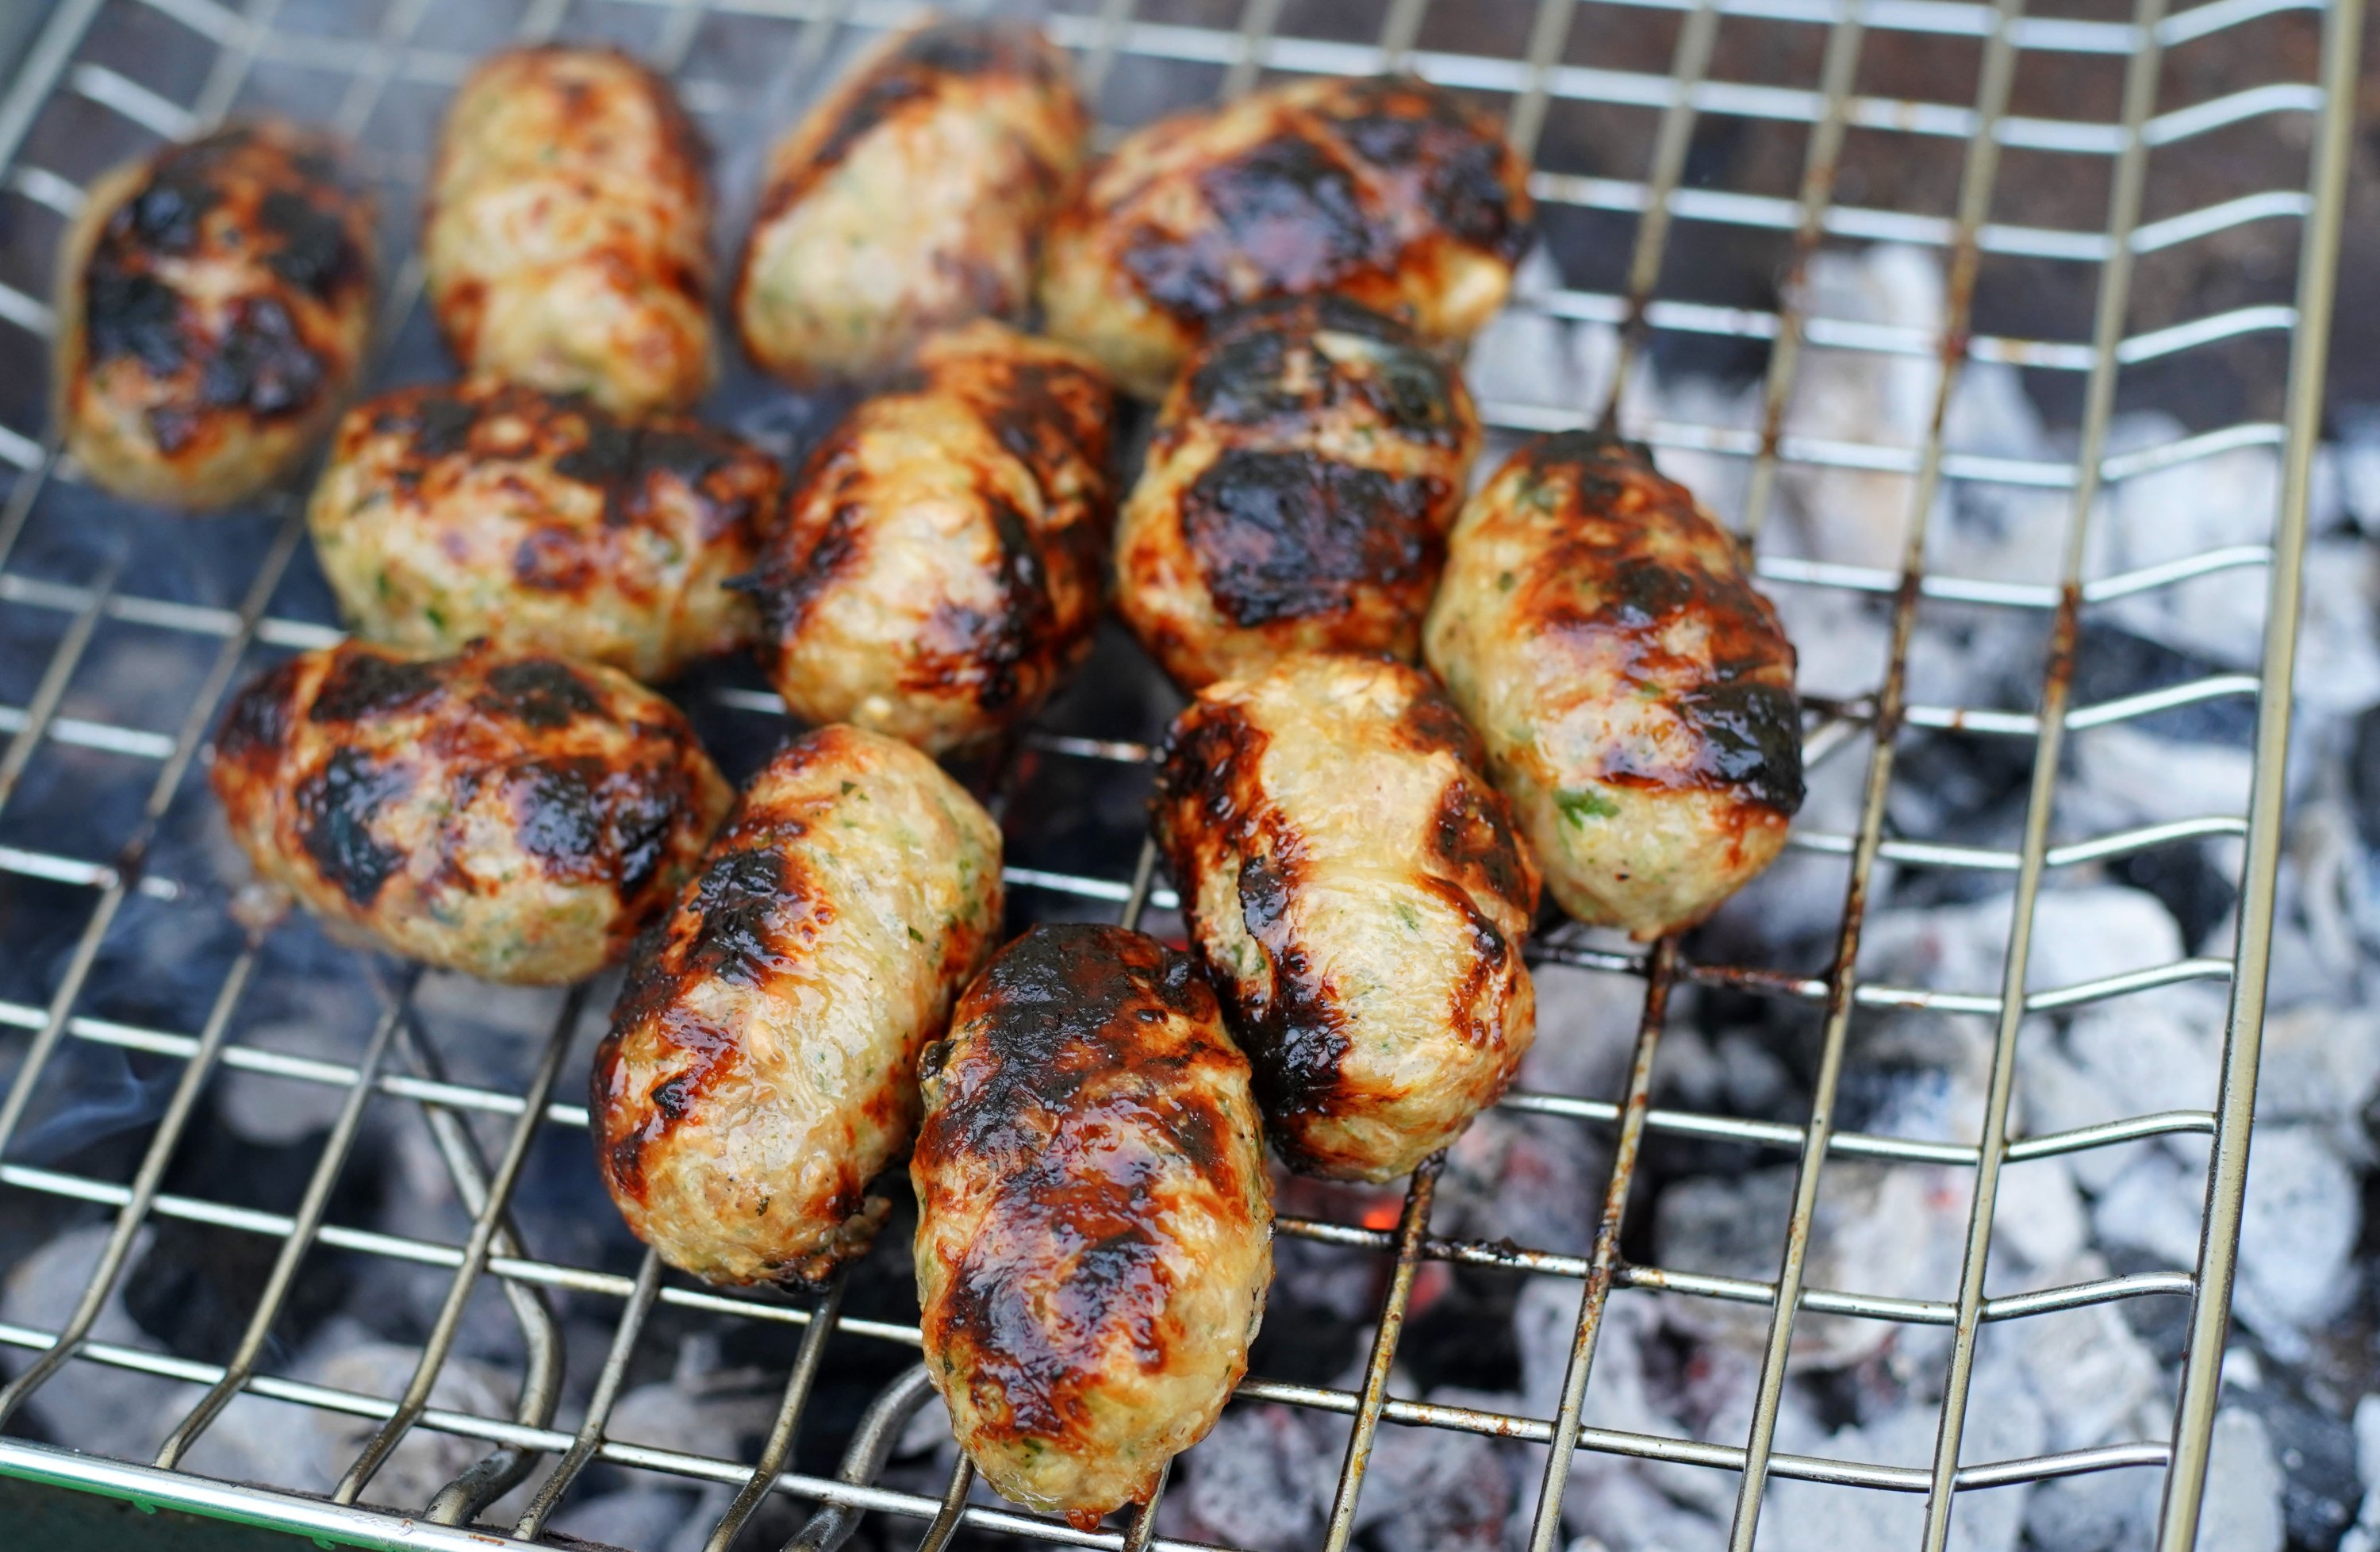 Şeftali kebab is actually a Cypriot dish. (Shutterstock Photo)